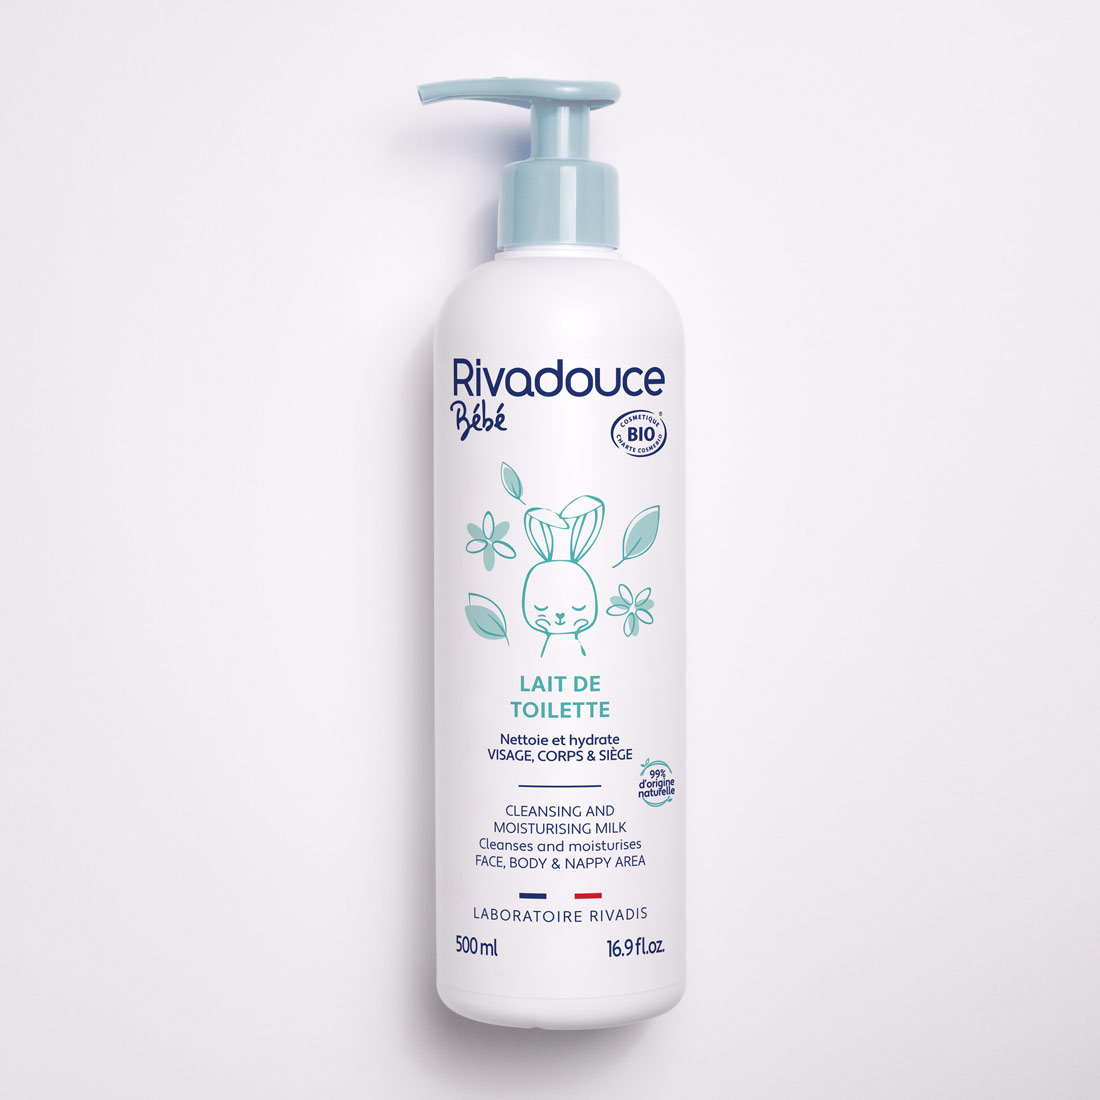 Rivadouce Bebe Cleansing Milk Face And Body Cleanses And